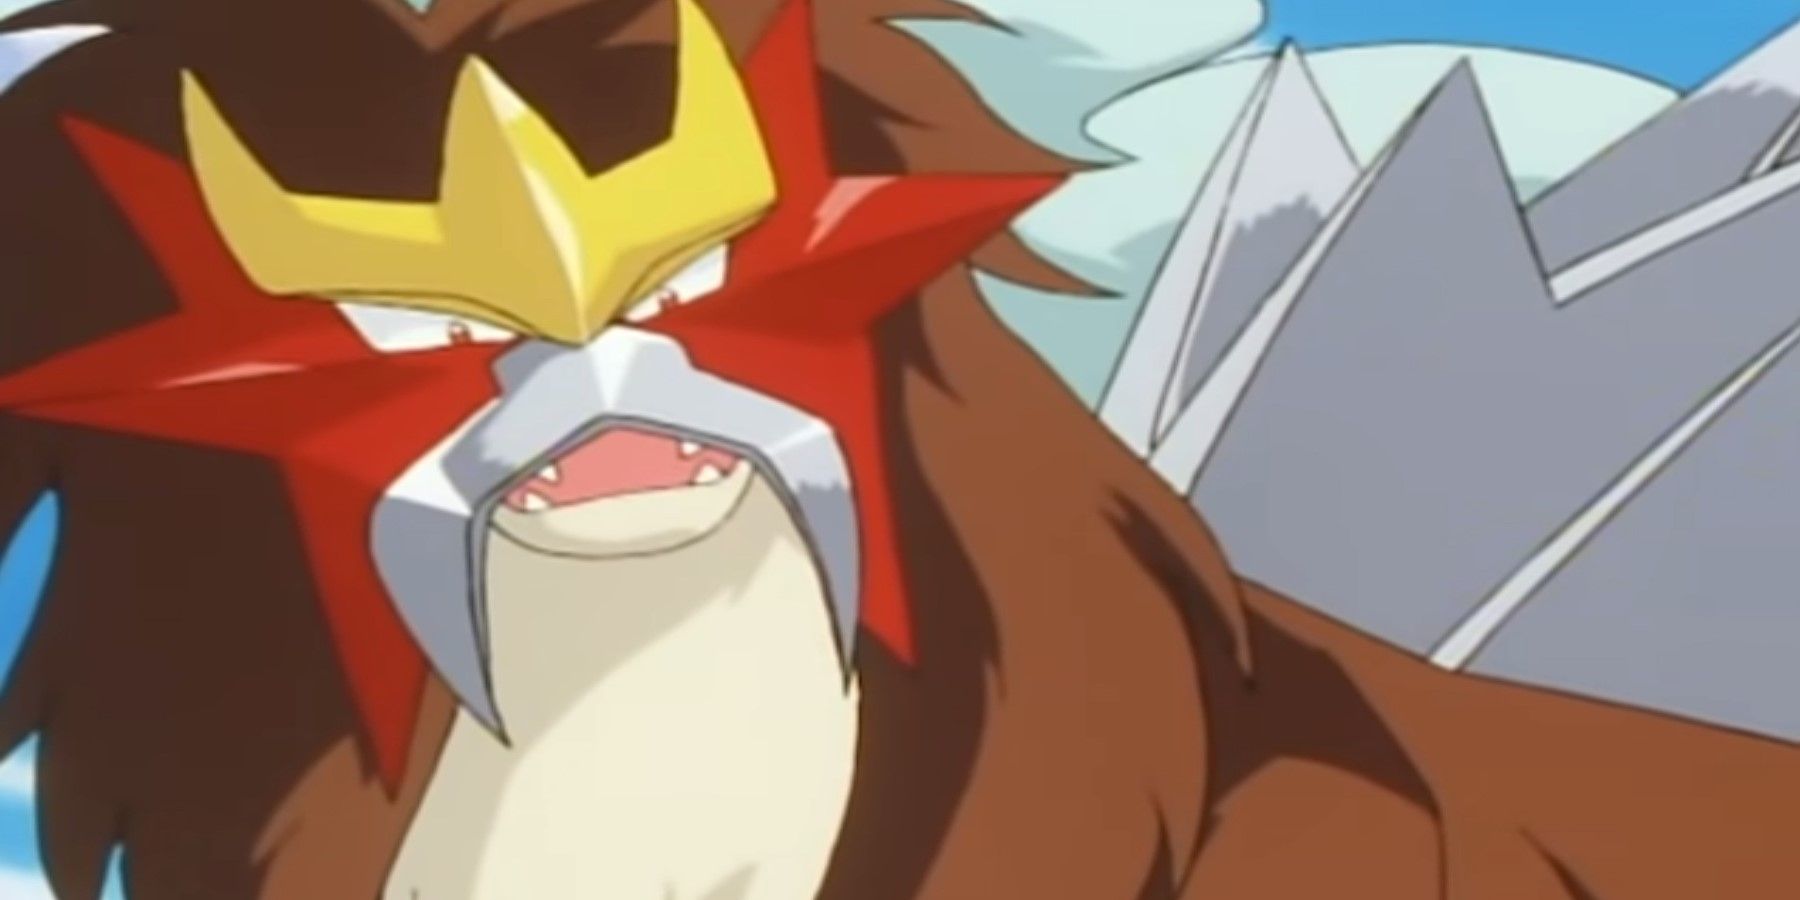 Pokemon Scarlet and Violet's Paradox Suicune and Raikou Could Be a Blessing  in Disguise for Entei